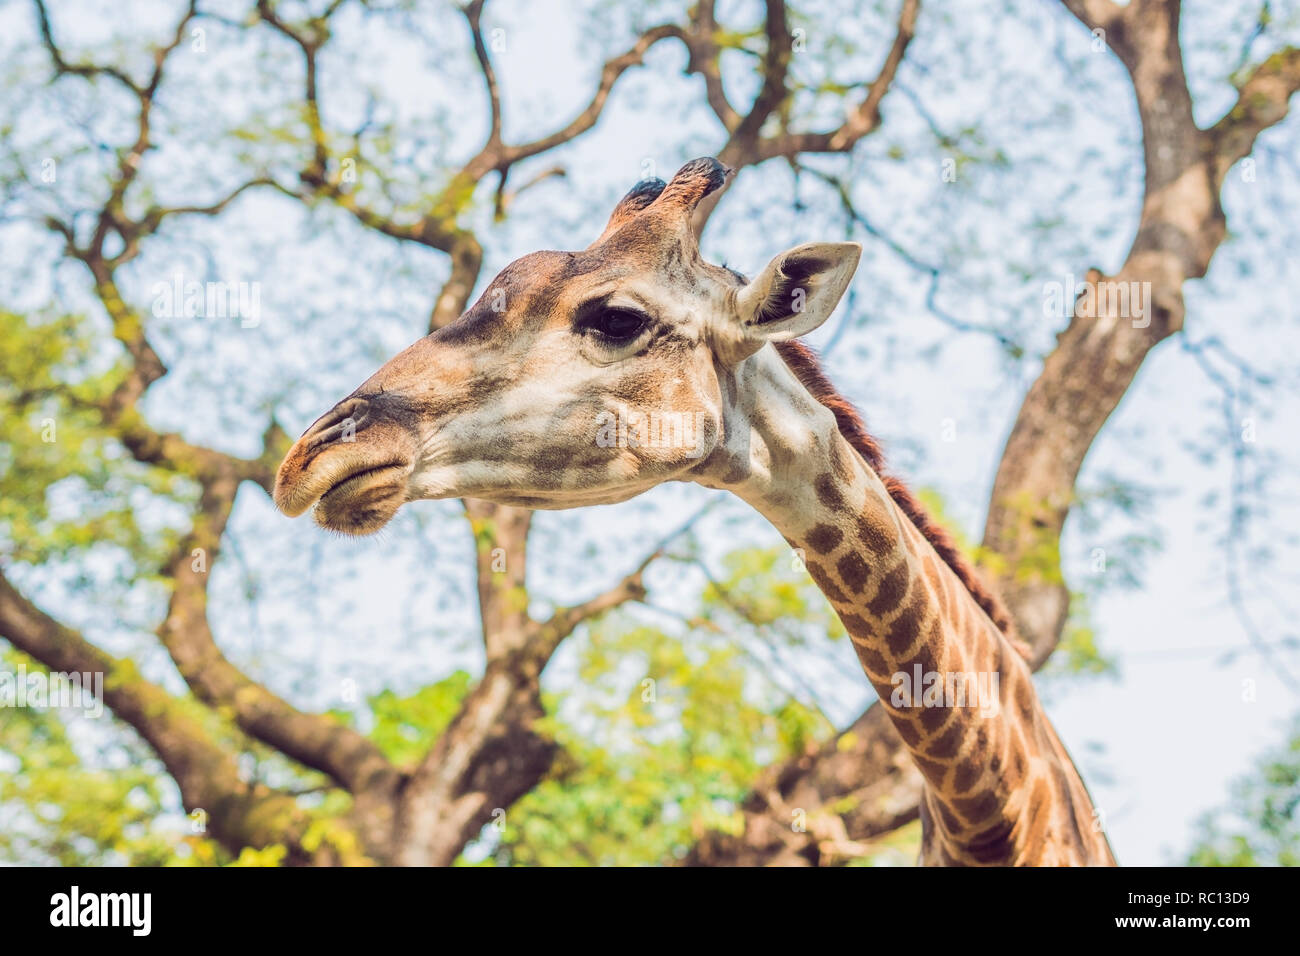 giraffe eating from a tree in a gorgeous landscape in Africa Stock Photo